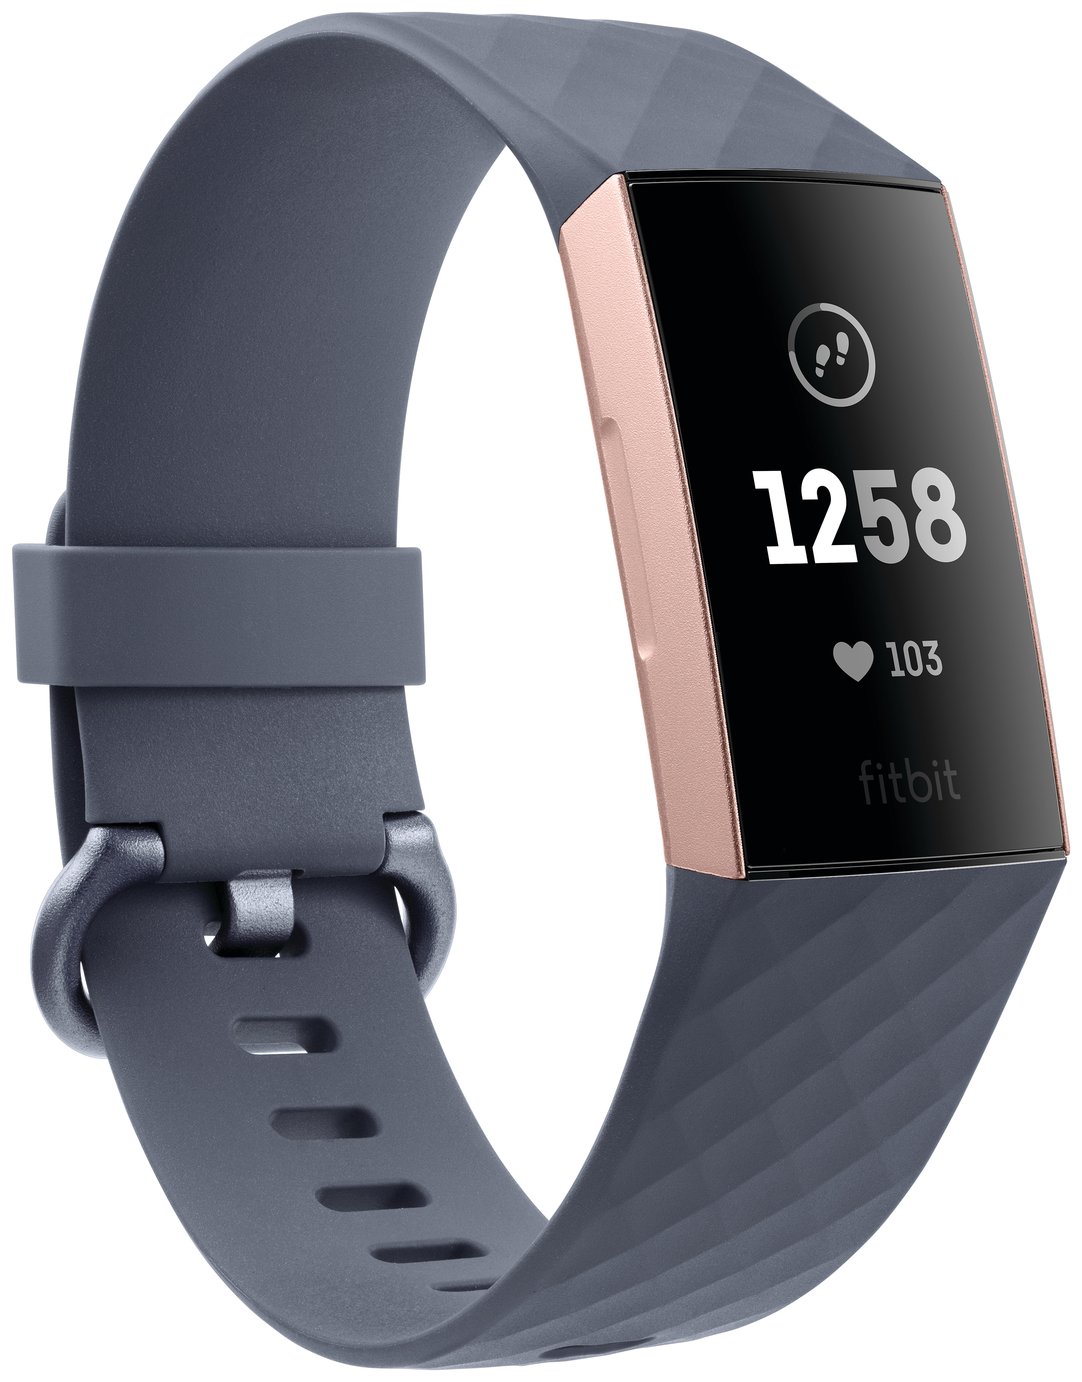 Fitbit Charge 3 Fitness Tracker Review